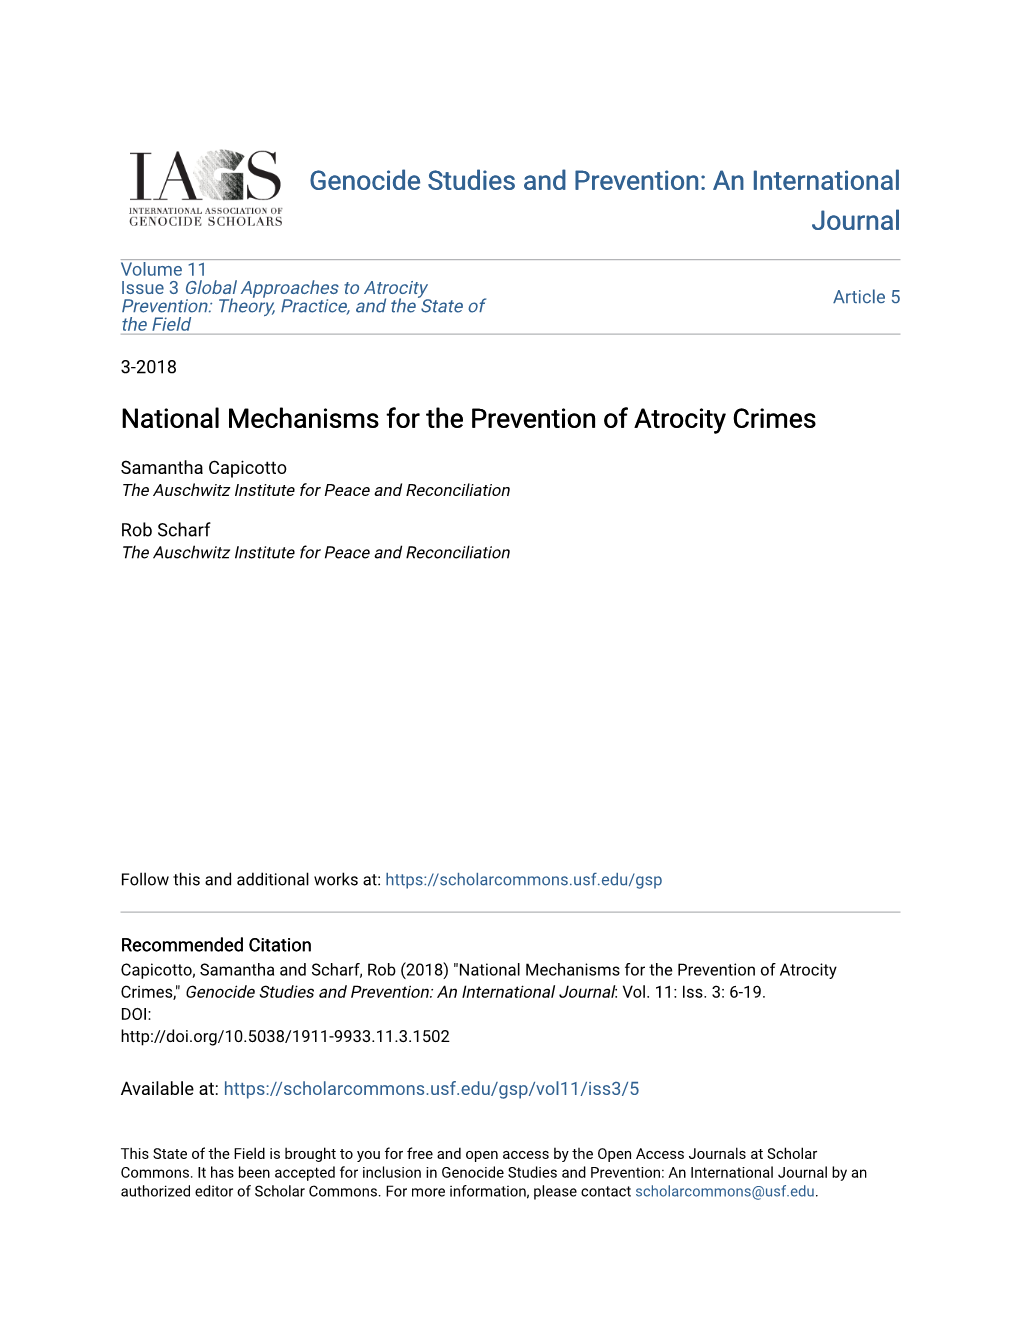 National Mechanisms for the Prevention of Atrocity Crimes